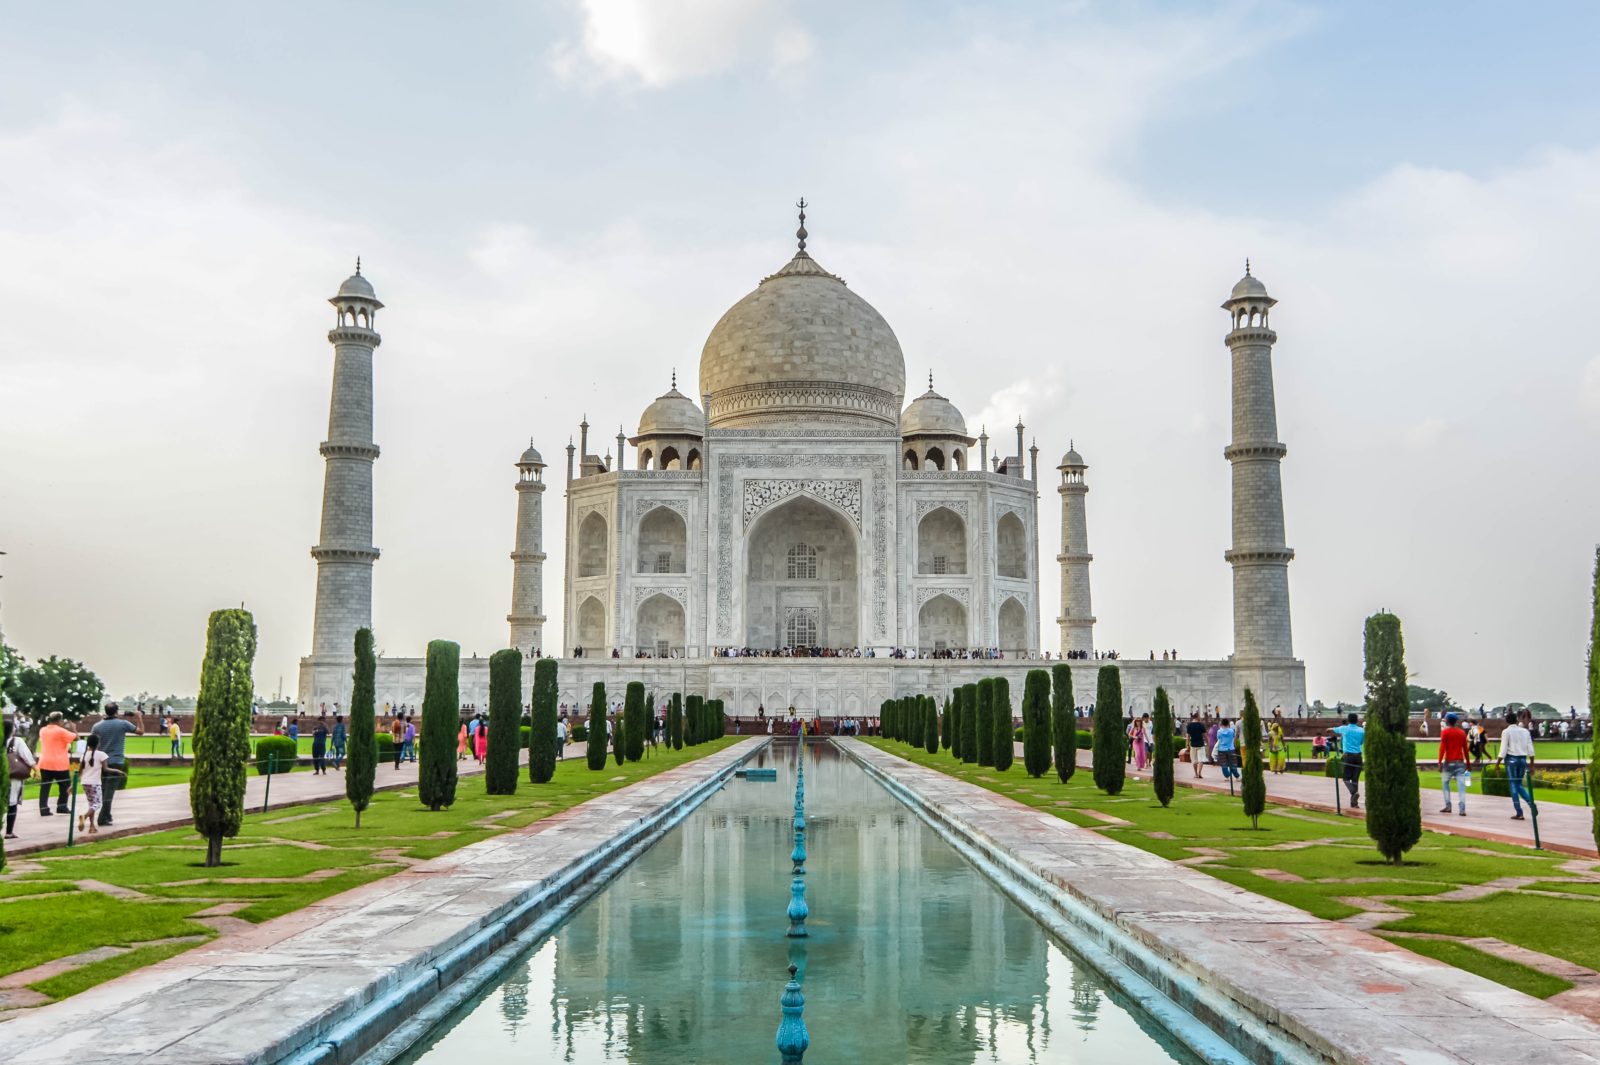 The Taj Mahal in India, a country known for its tea